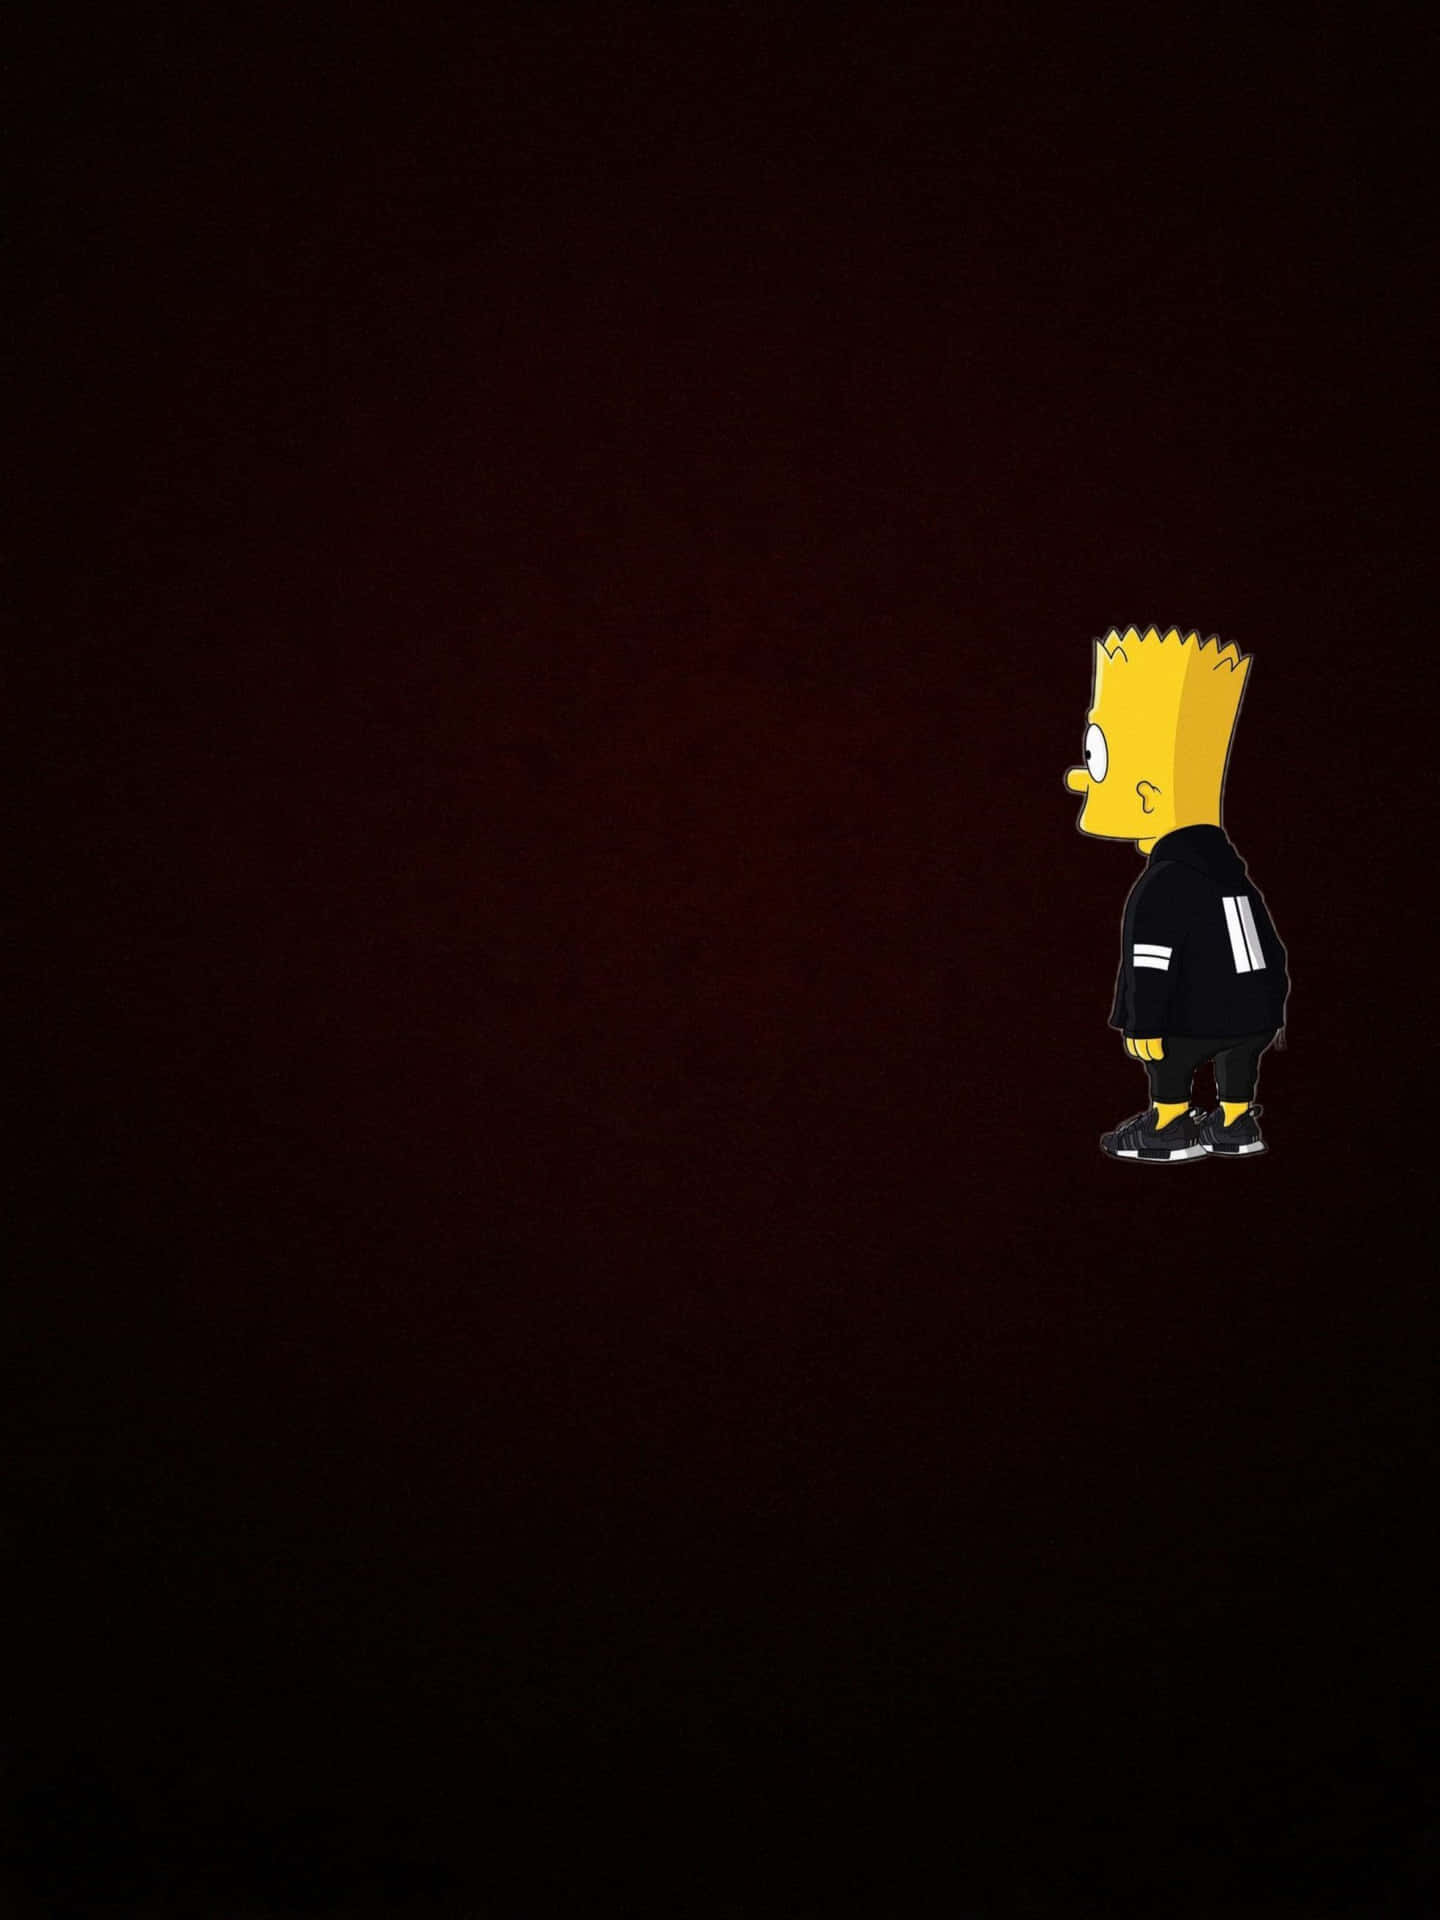 Bart Simpson with black background - The Simpsons, Bart Simpson